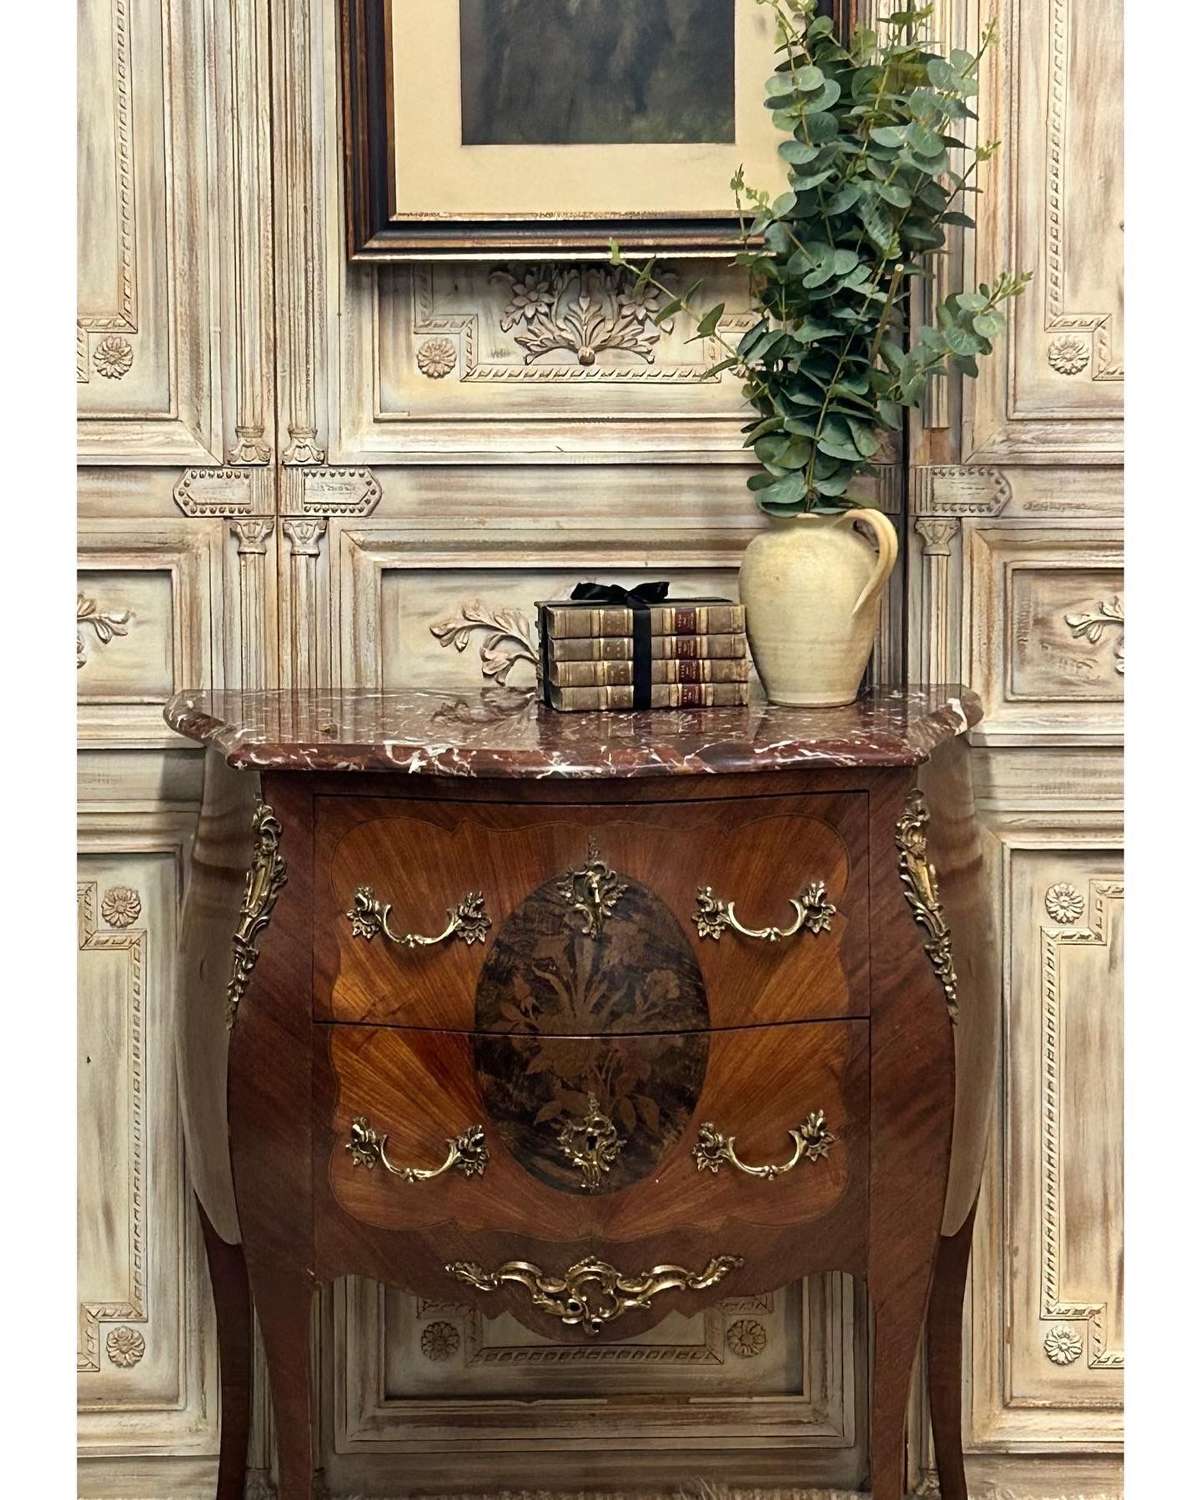 French Marble Top Mahogany Chest of Drawers